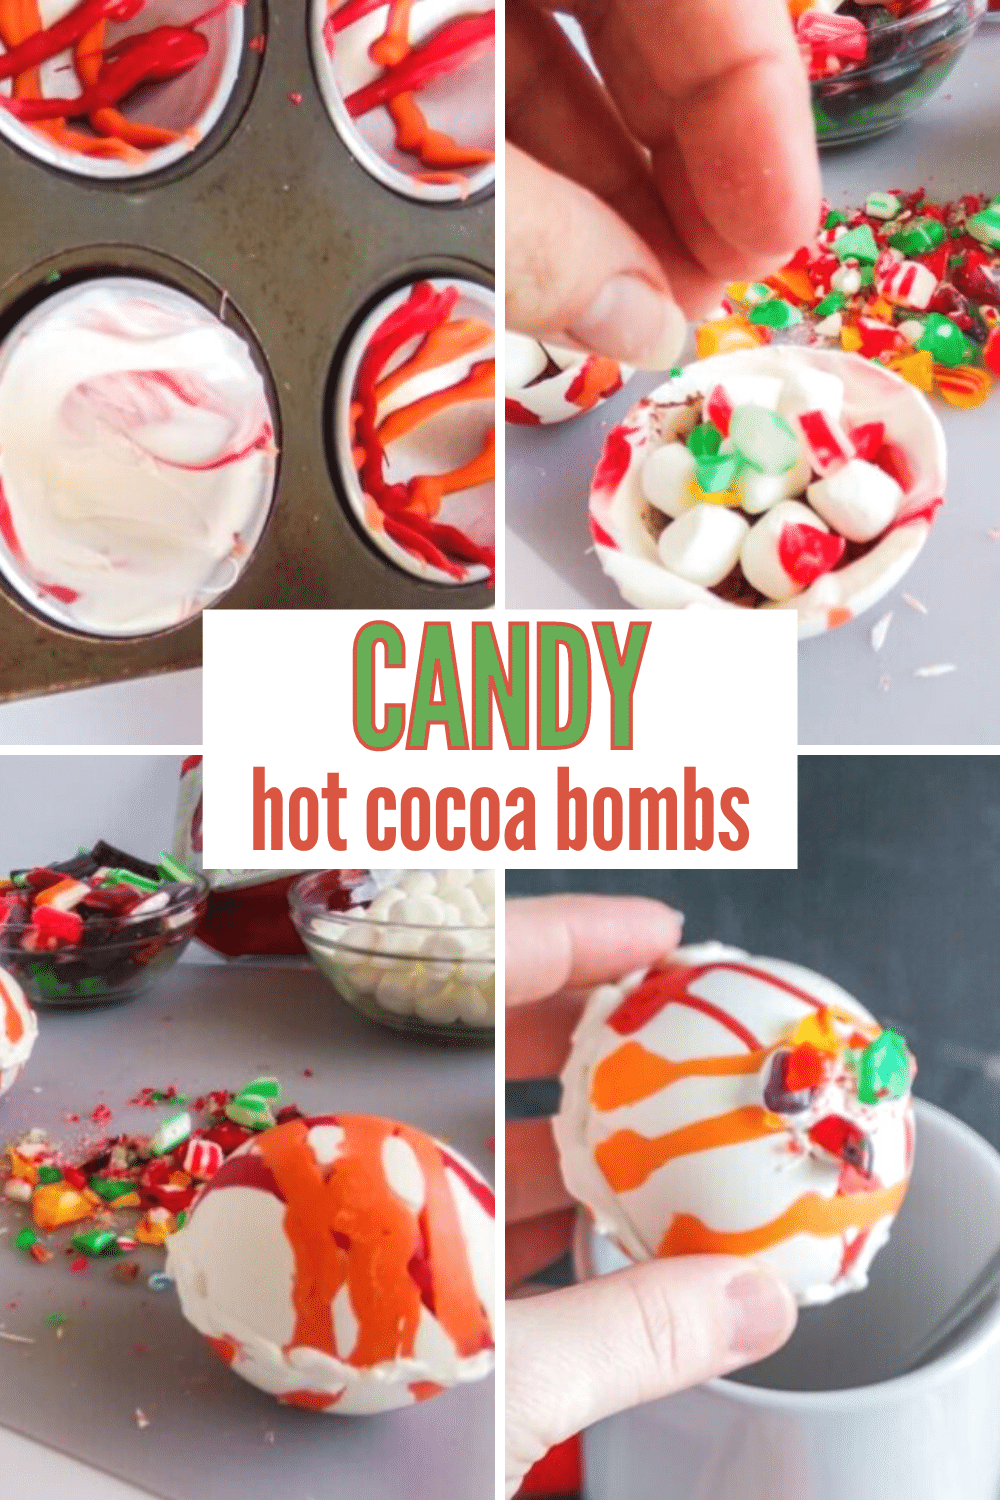 These Old Fashioned Candy Hot Cocoa Bombs are legit amazing and delicious! They're so simple to make as well! #hotcocoabombs #hotcocoa #oldfashionedcandy #christmas via @wondermomwannab